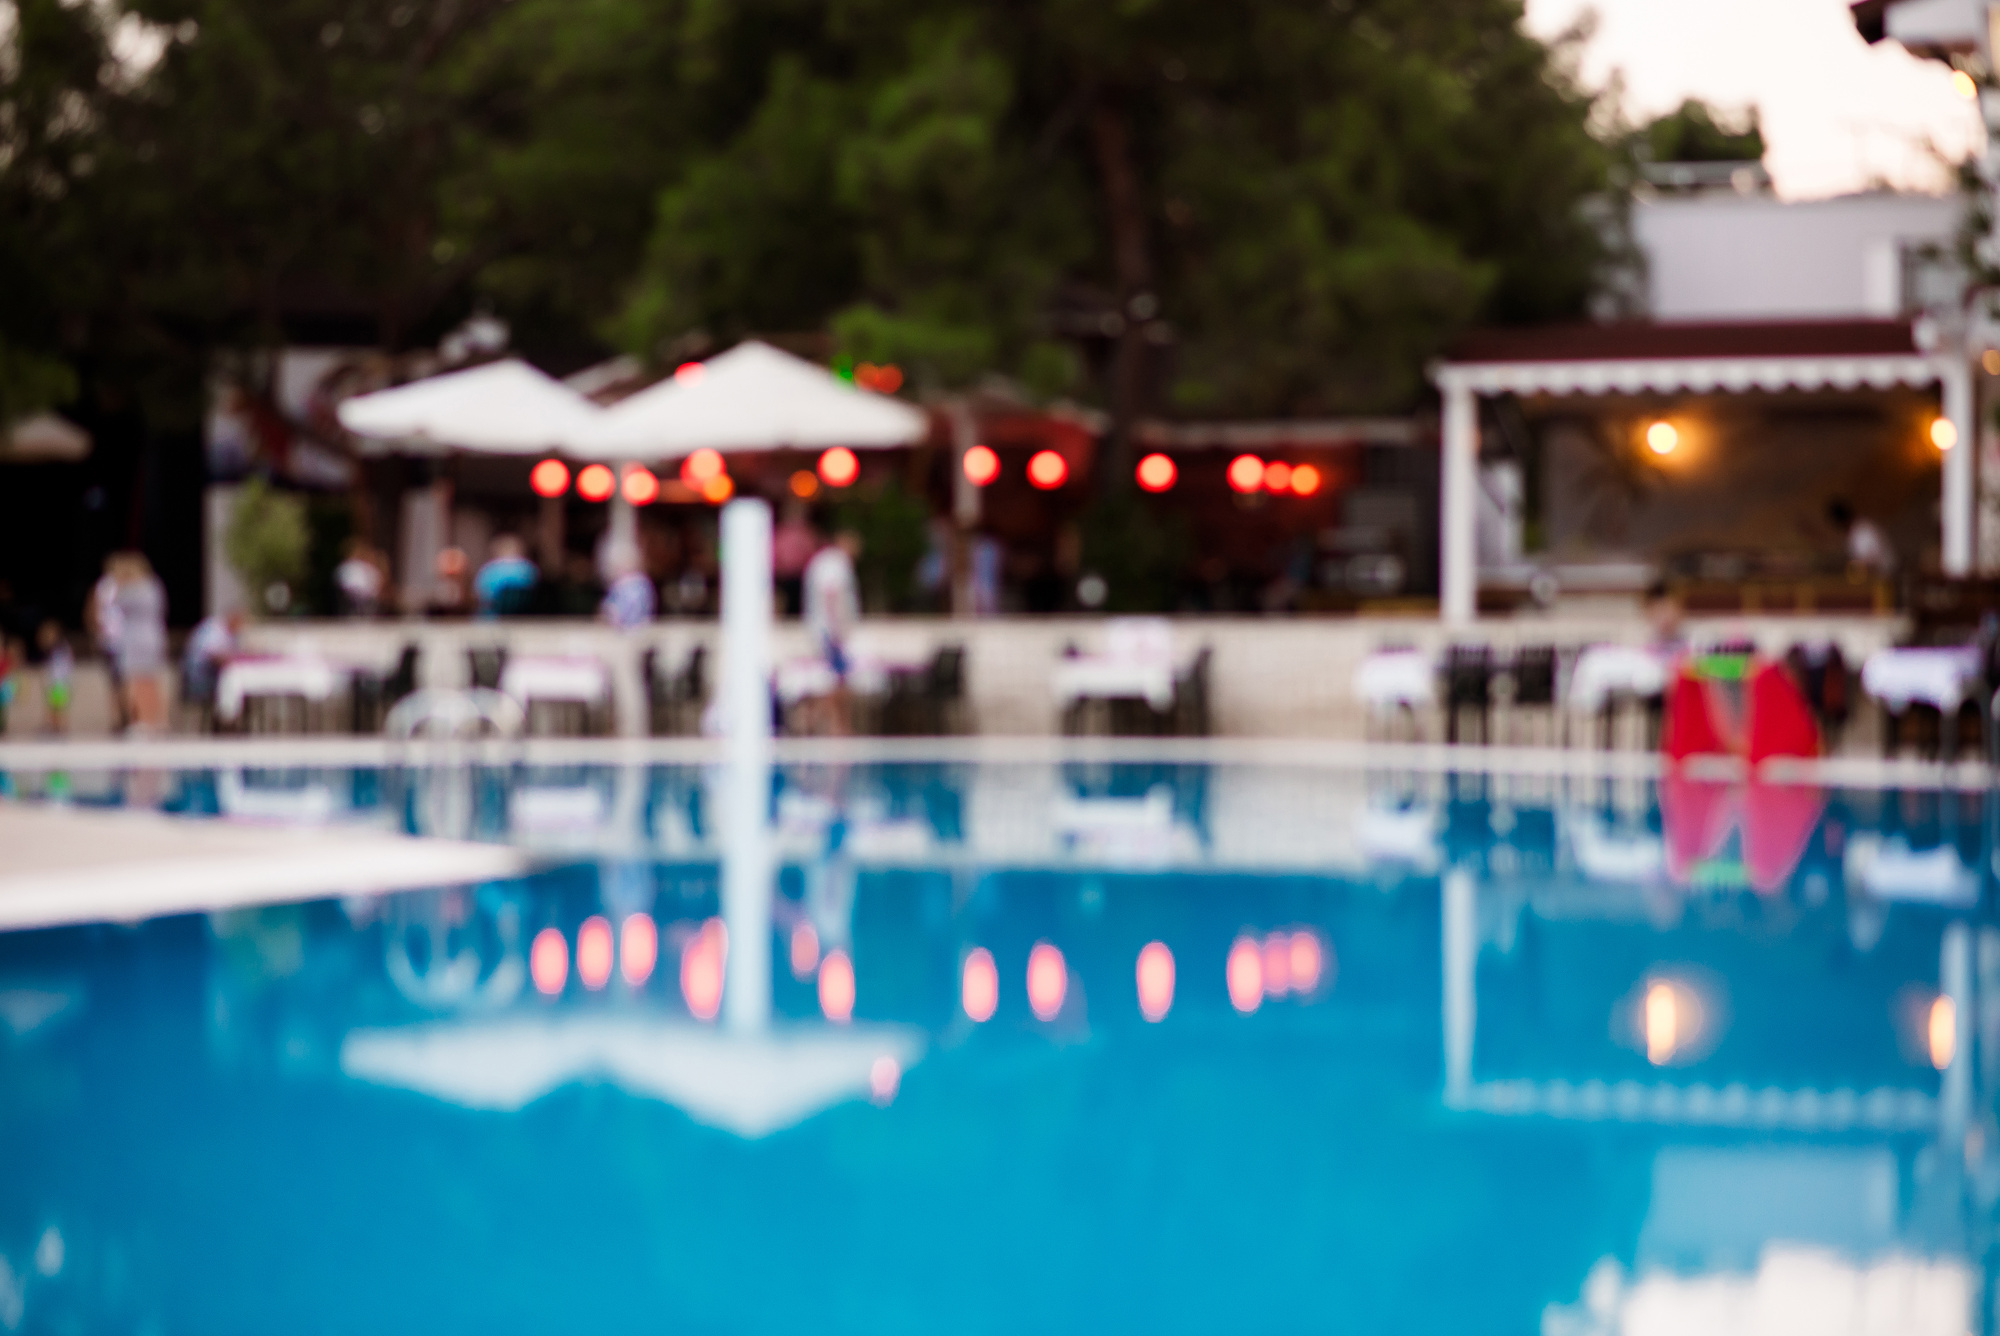 Blur summer background for resort hotel pool party with blue